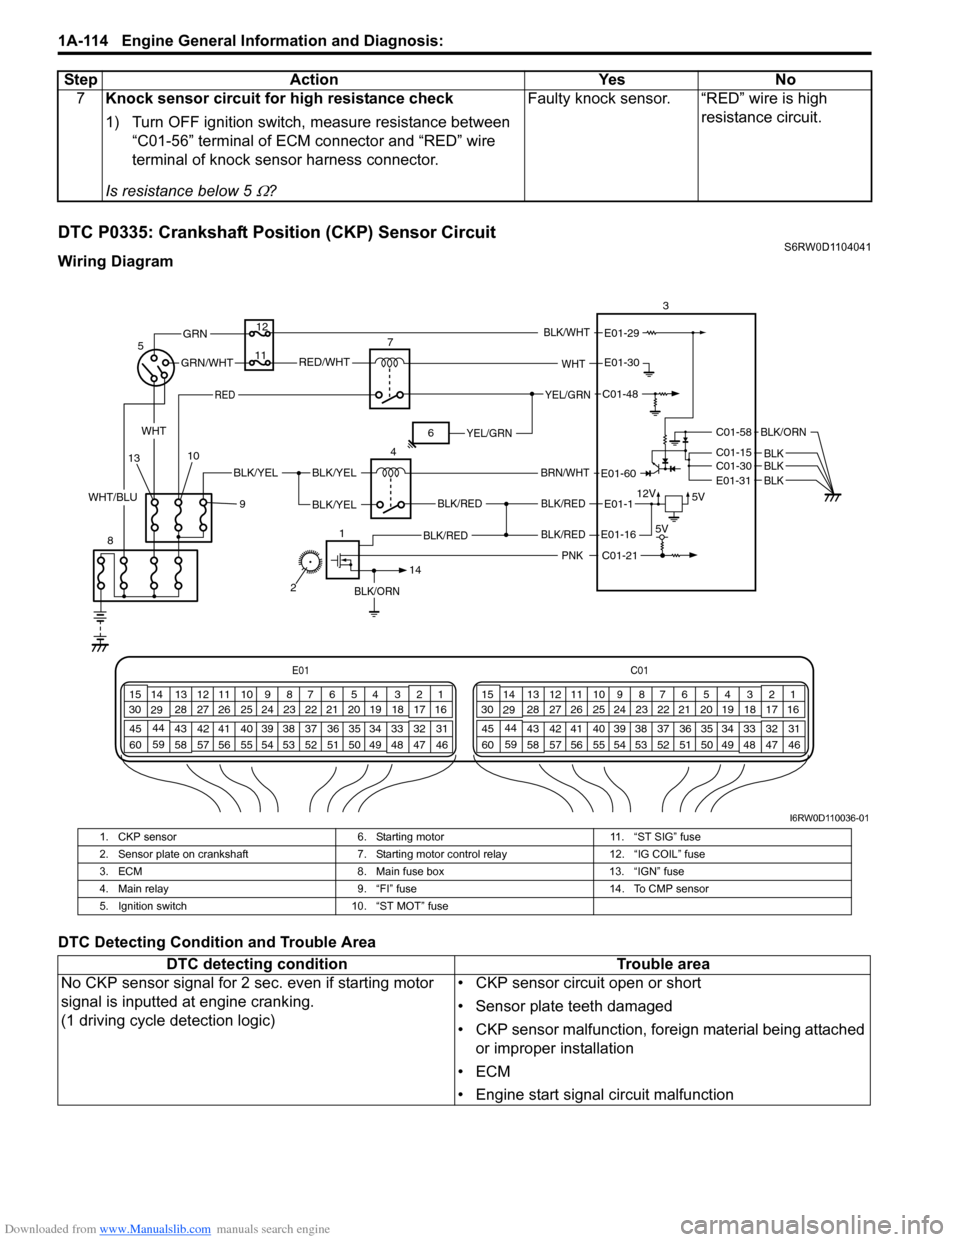 SUZUKI SX4 2006 1.G Service Workshop Manual Downloaded from www.Manualslib.com manuals search engine 1A-114 Engine General Information and Diagnosis: 
DTC P0335: Crankshaft Position (CKP) Sensor CircuitS6RW0D1104041
Wiring Diagram
DTC Detecting